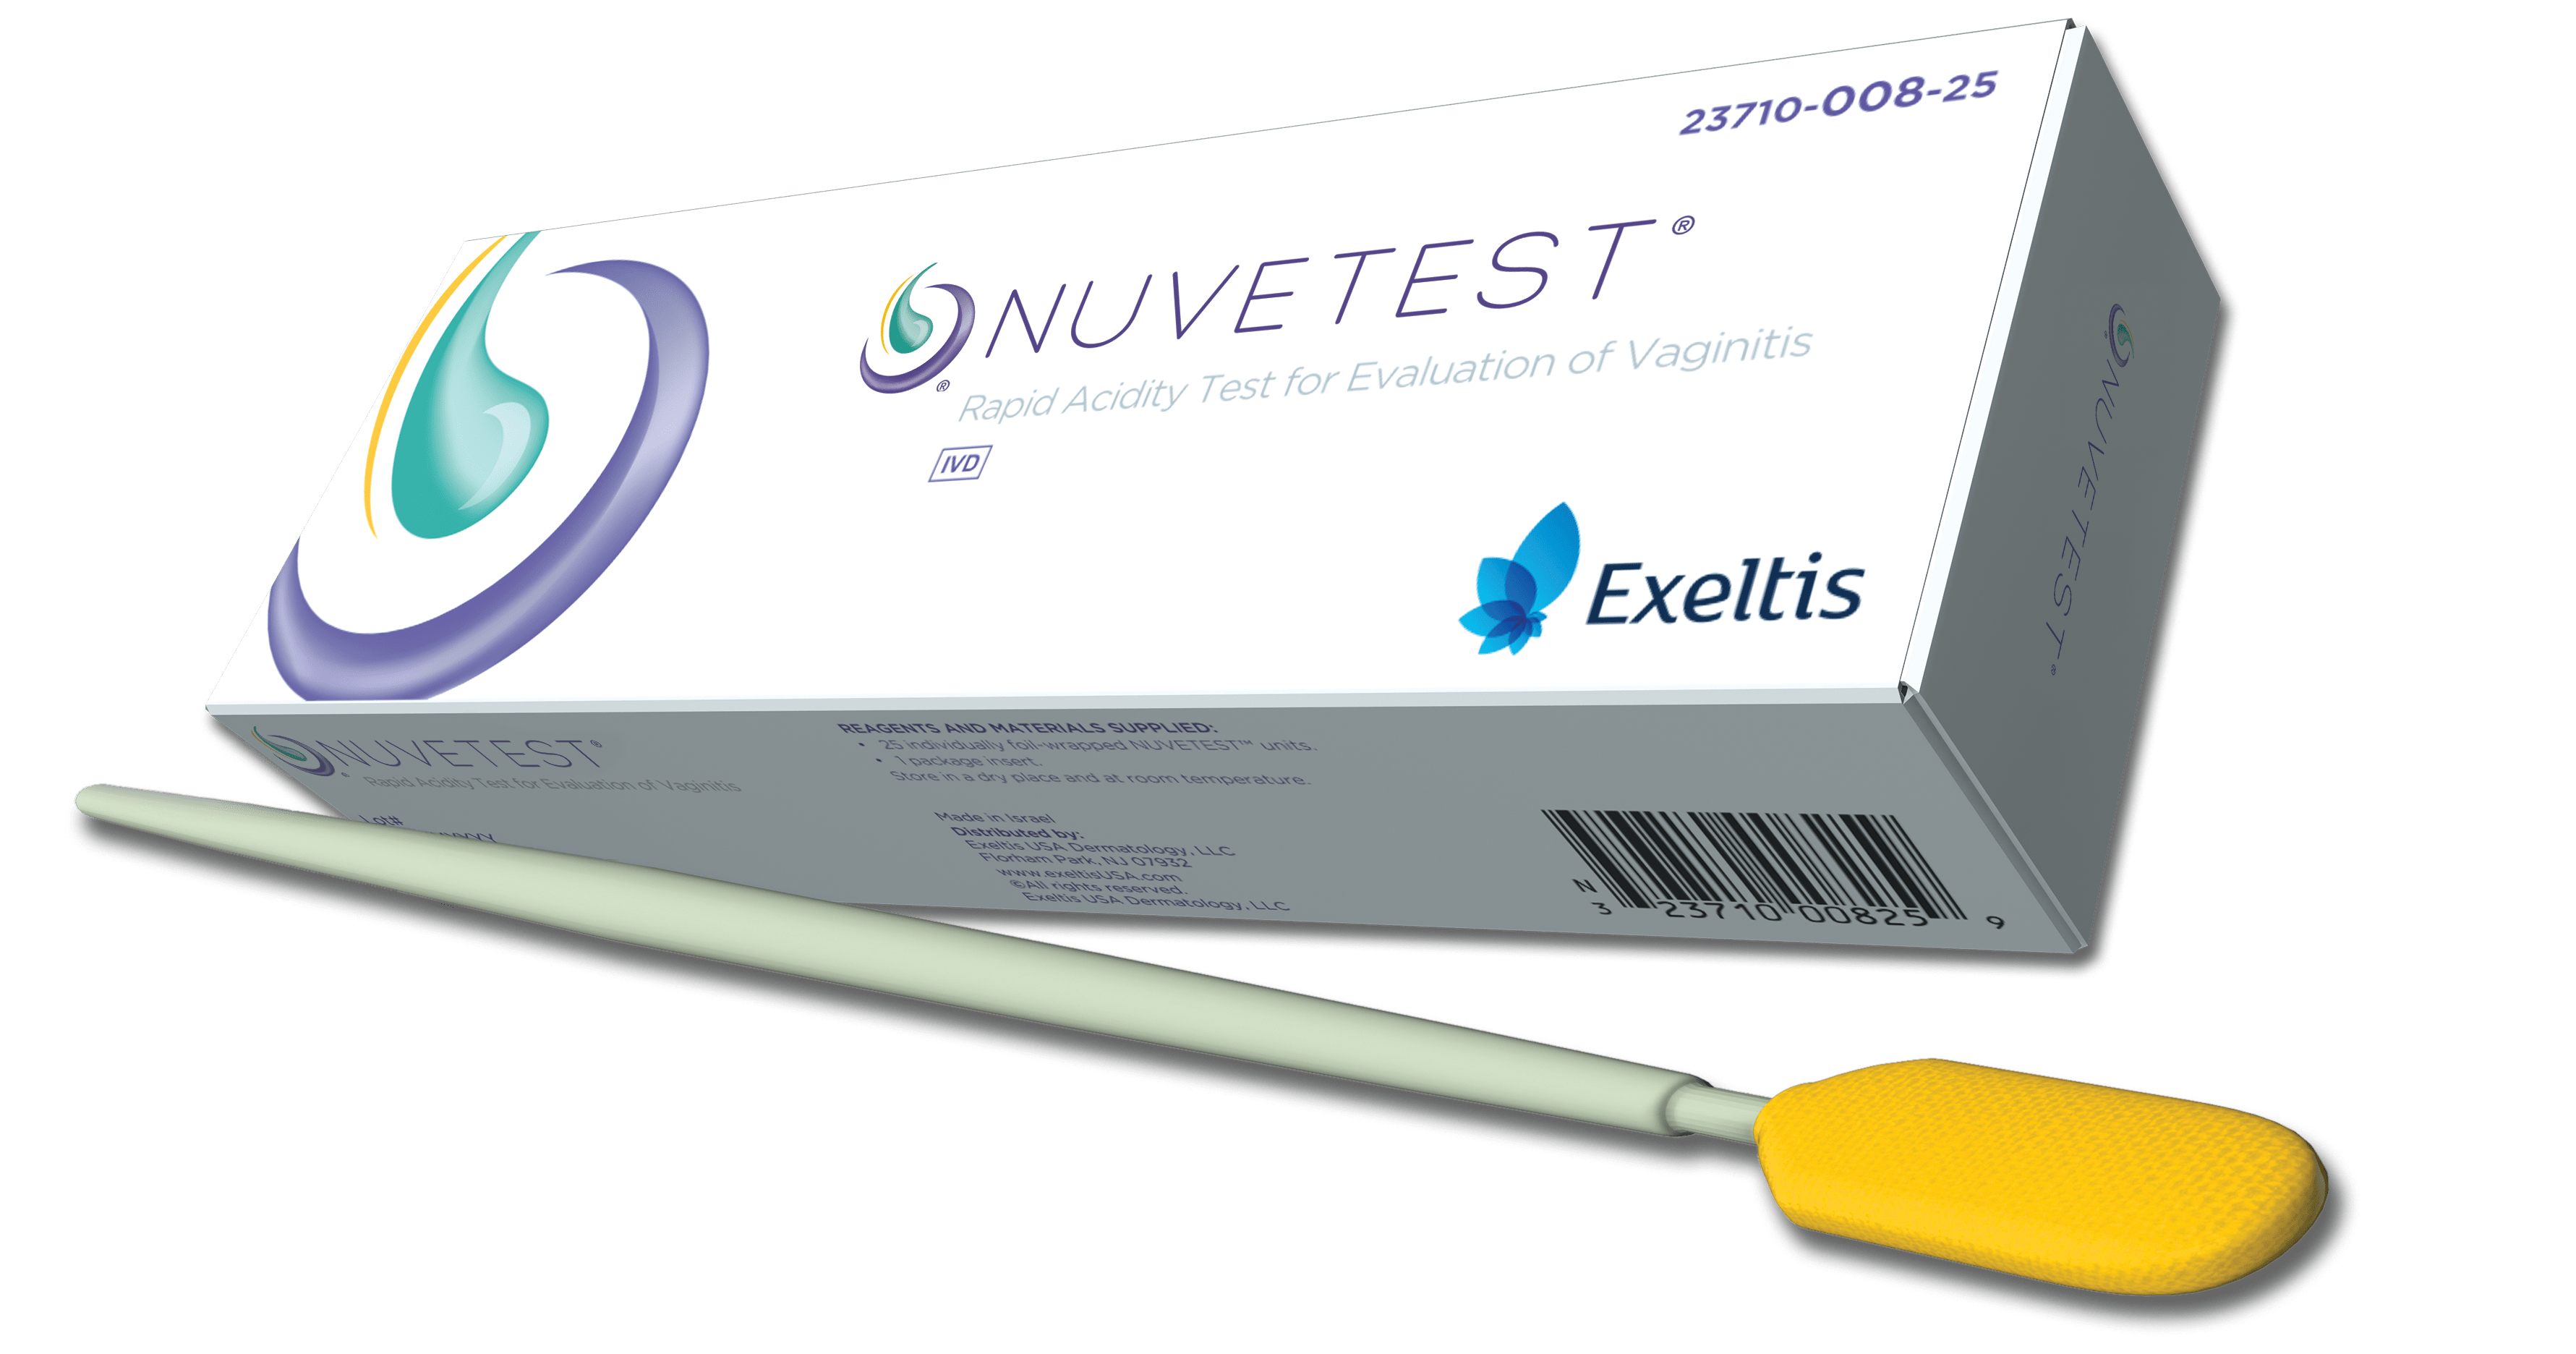 Photo of Nuvetest package with vaginal swab: Rapid Acidity Test for Evaluation of Vaginitis